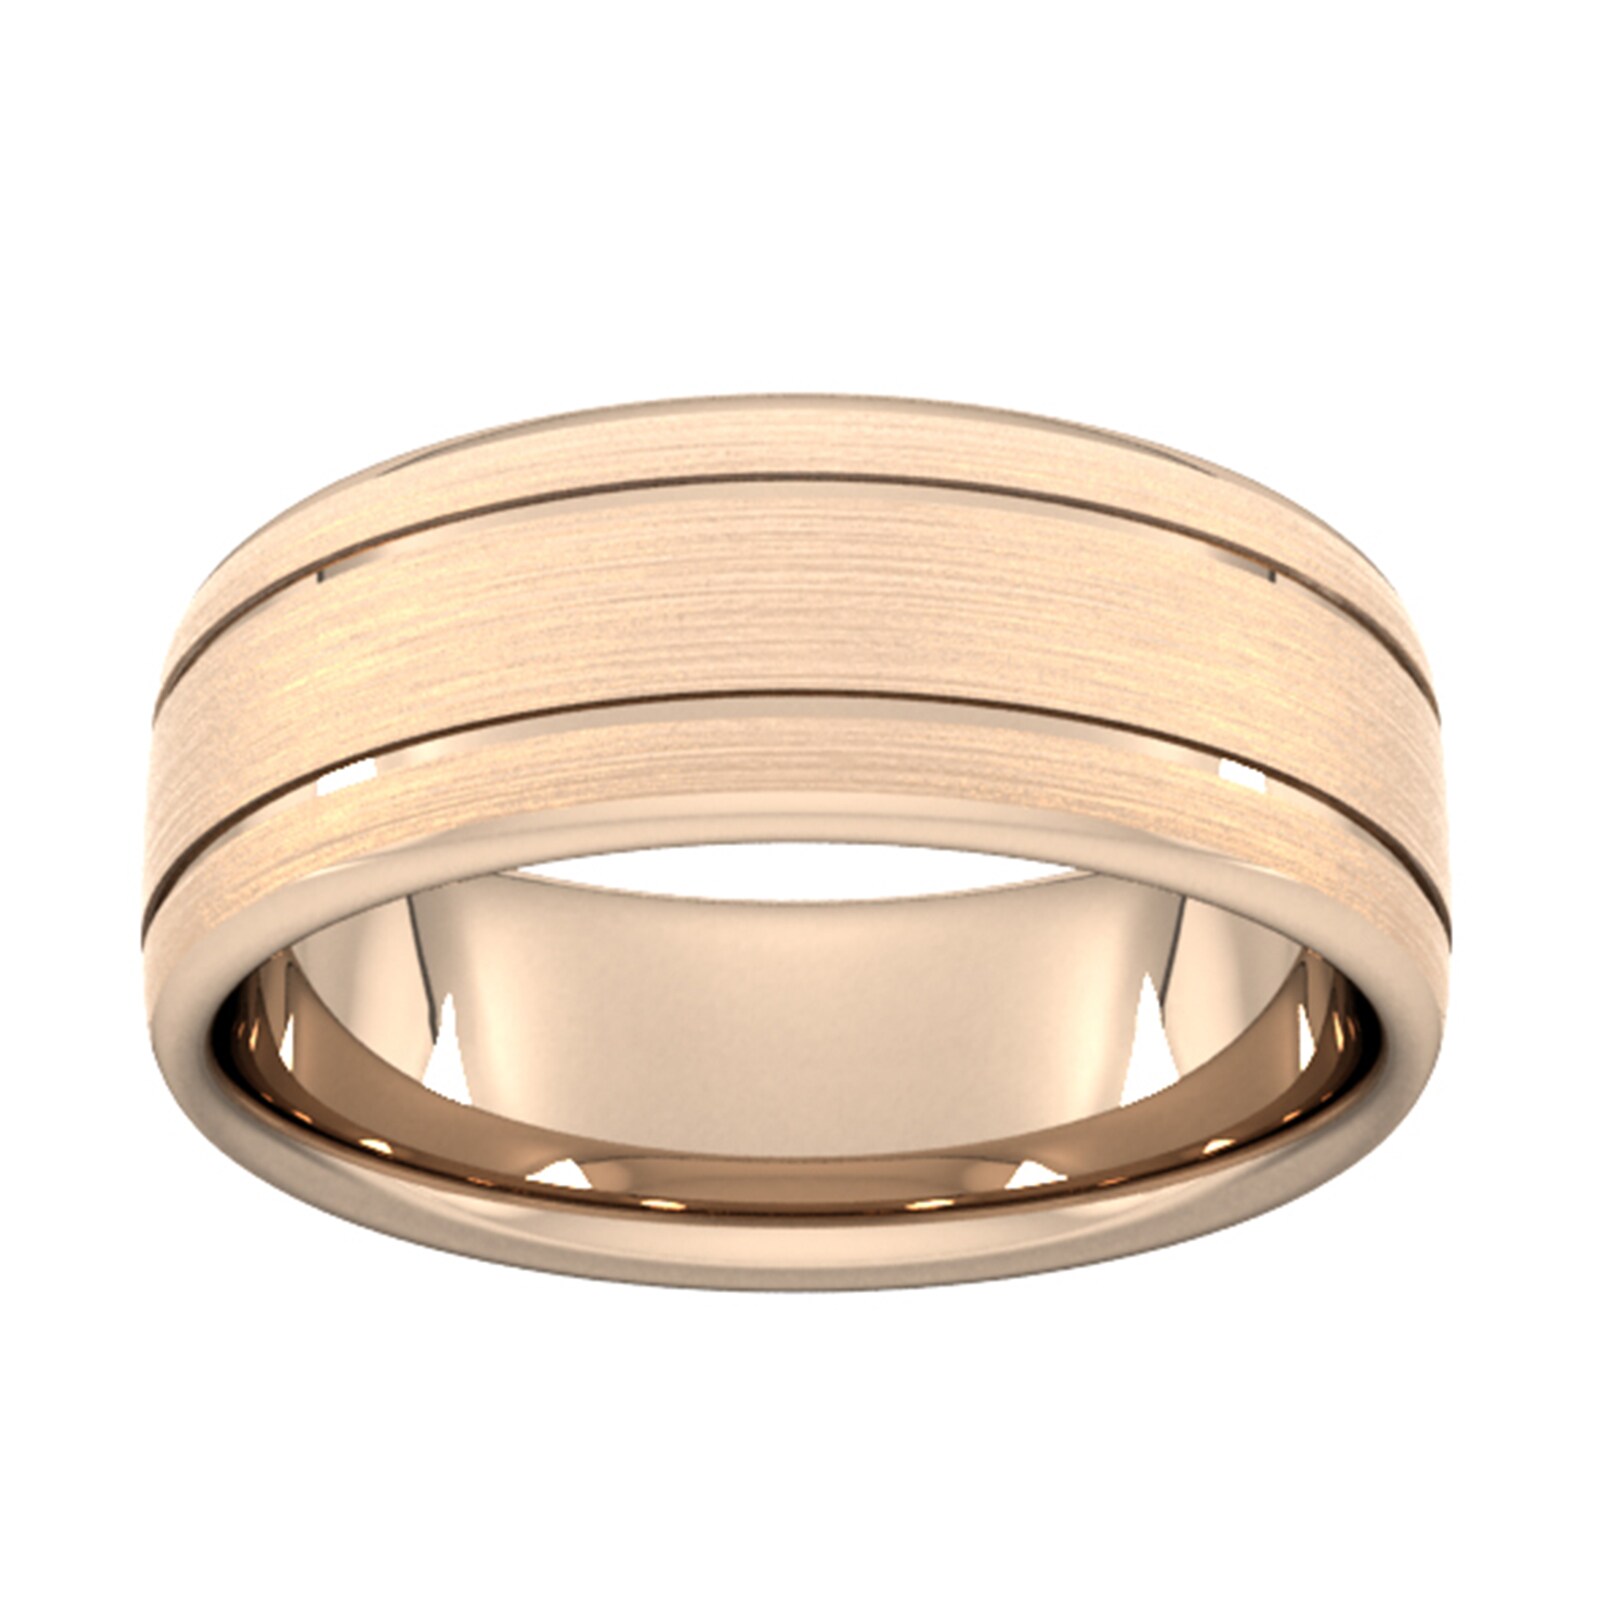 8mm Flat Court Heavy Matt Finish With Double Grooves Wedding Ring In 9 Carat Rose Gold - Ring Size U